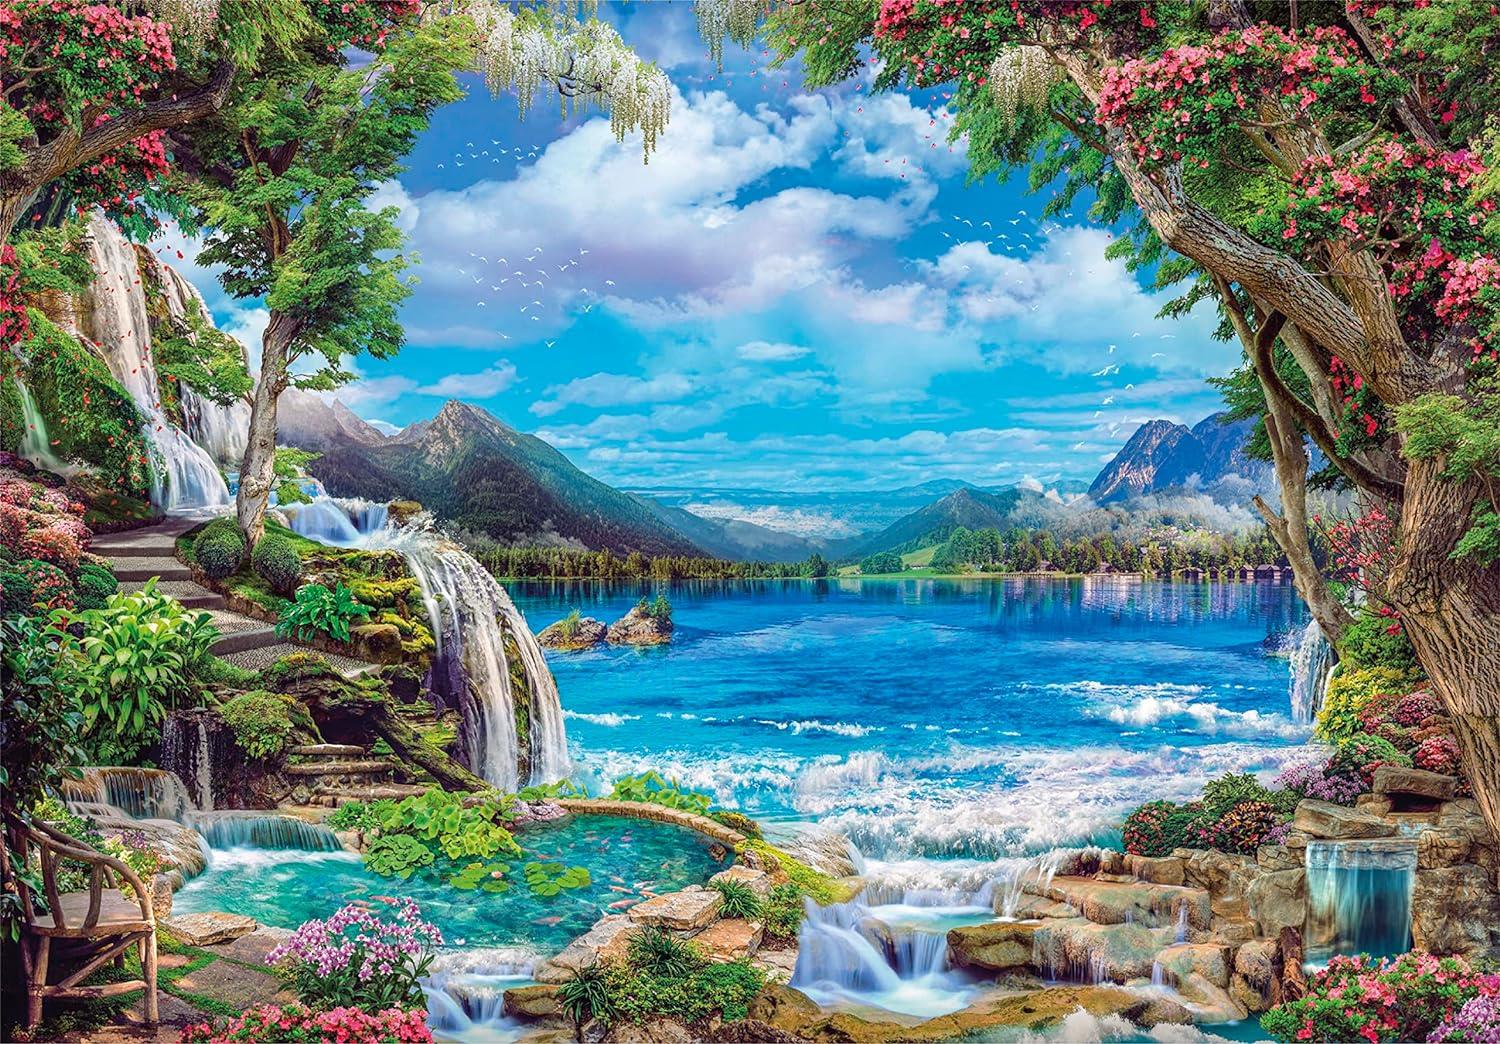 Clementoni Paradise On Earth Jigsaw Puzzle (2000 Pieces)